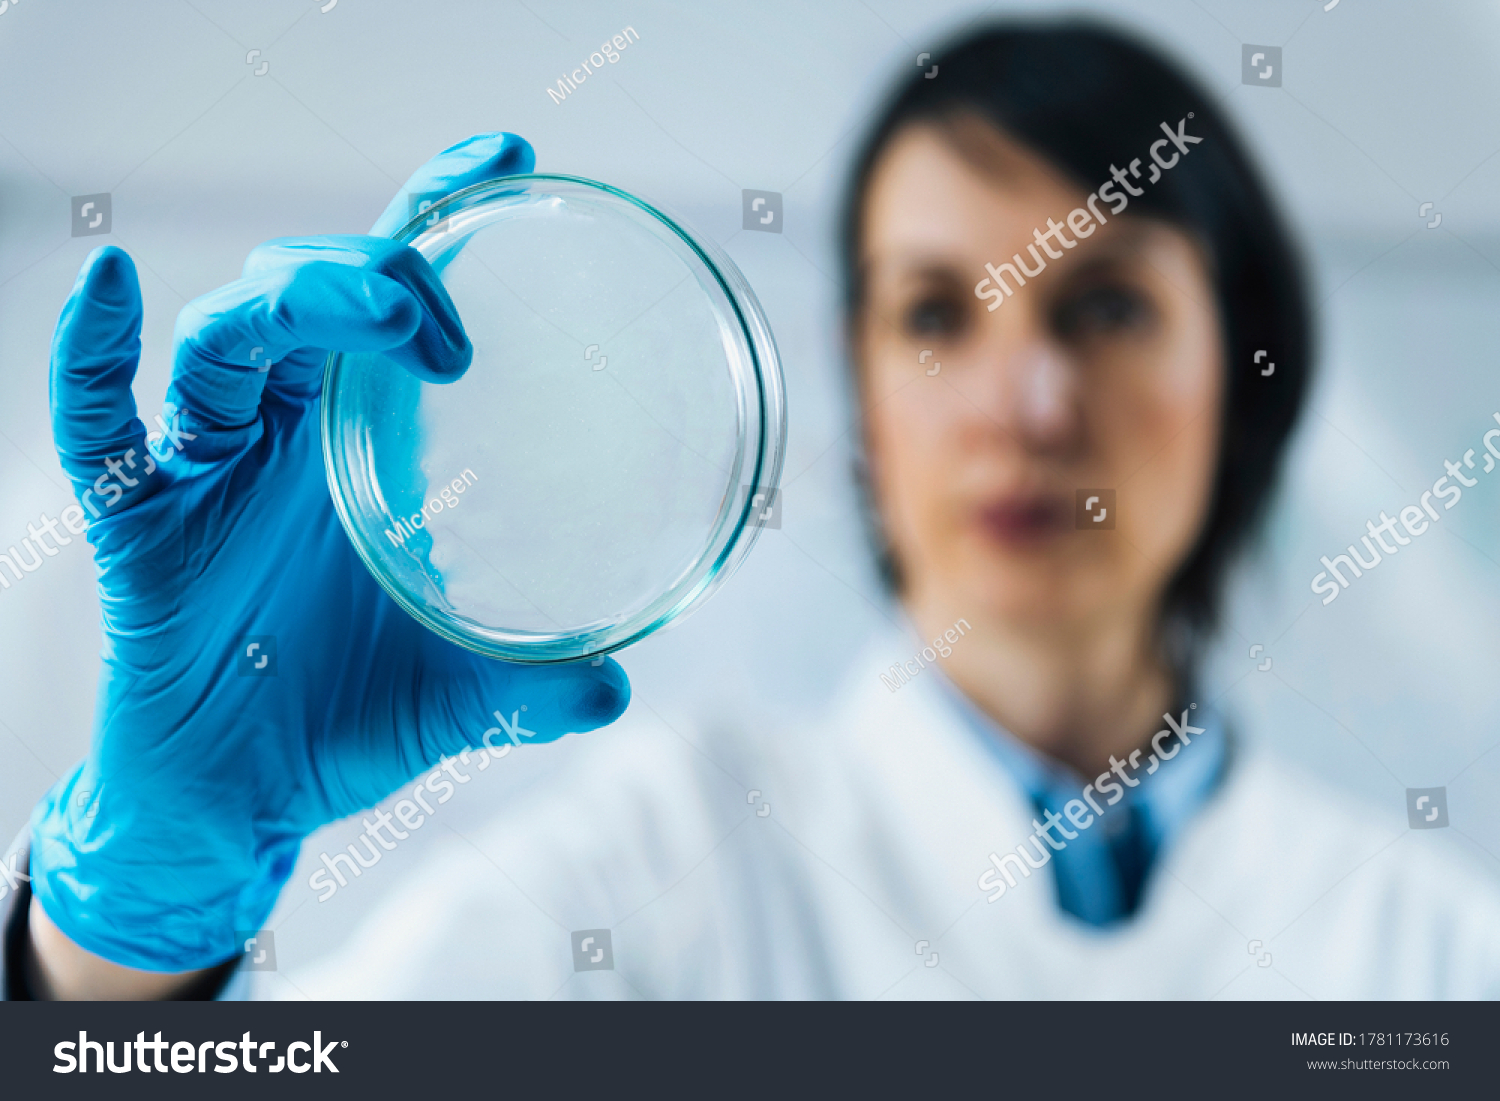 Food Quality Assessment in Microbiology Laboratory, Microbiologist at work, examining petri dishes with samples  #1781173616